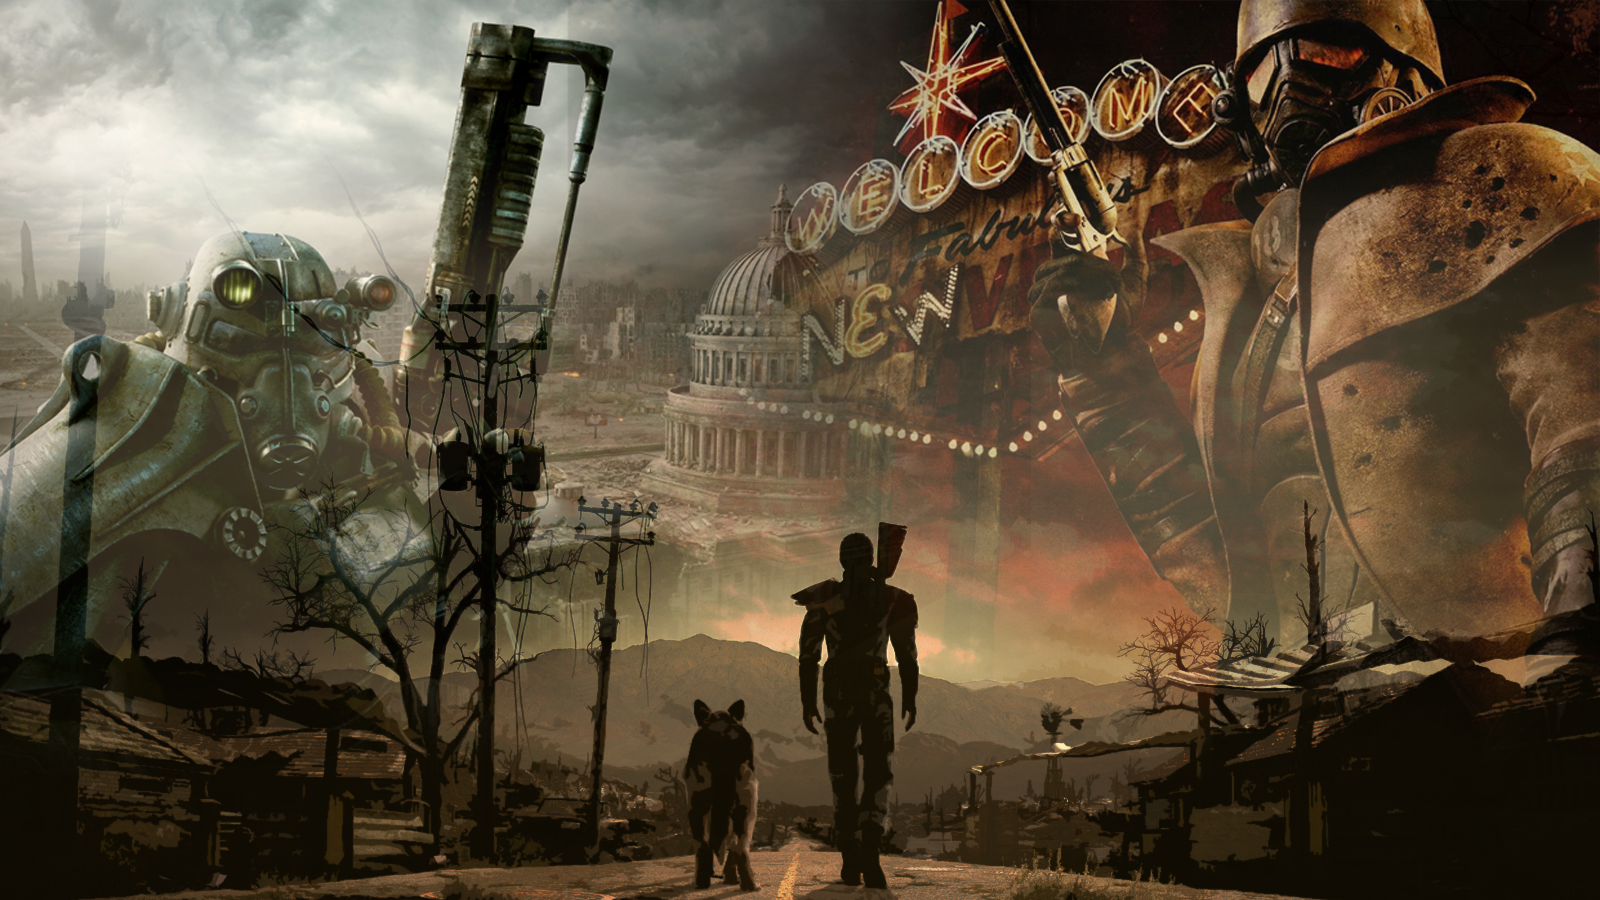 Fallout new sfw. Fallout 3 Tale of two Wastelands. Фоллаут Tale of two Wastelands. Фоллаут 3 Пустошь. Tale of two Wastelands Fallout New Vegas.